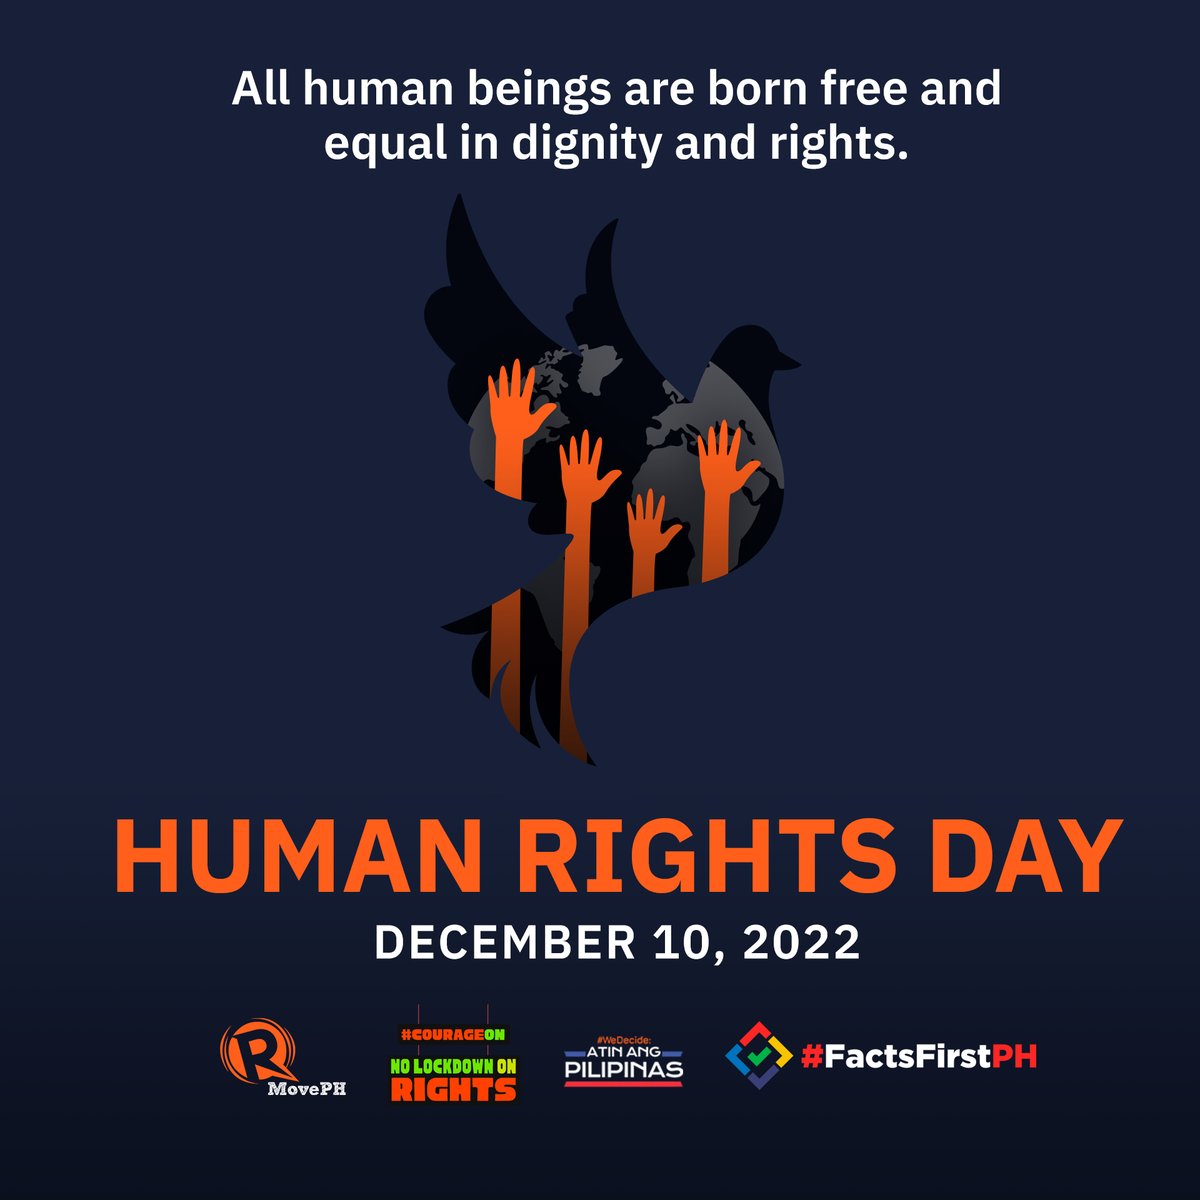 On Human Rights Day, fairness and justice remain elusive the urban poor, women, indigenous communities, farmers, fisherfolk, wage earners. #CourageON #HoldTheLine #FactsFirstPH